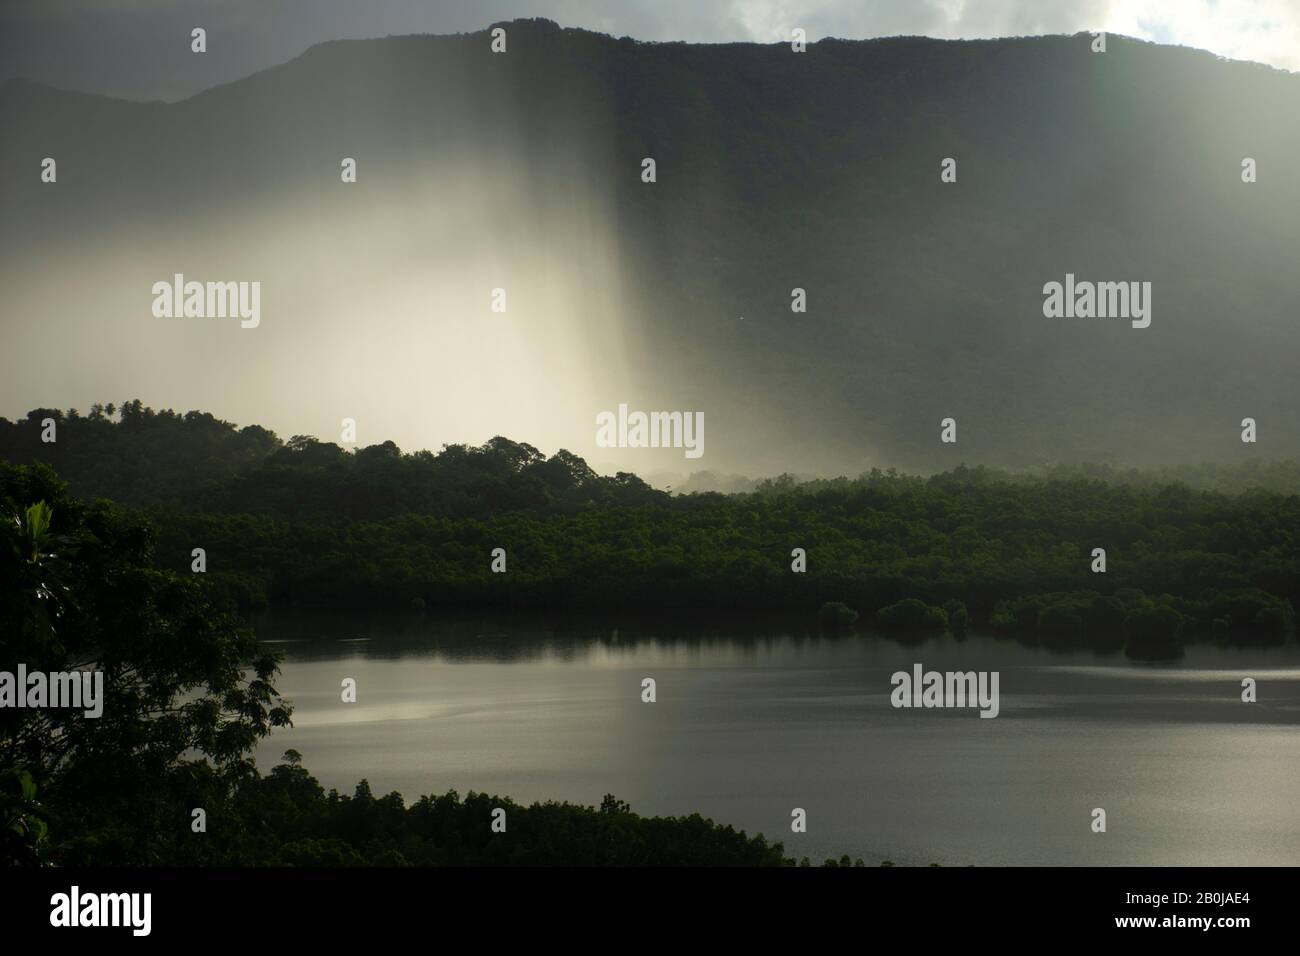 Rain approaching the mangrove, Pohnpei, Federated States of Micronesia Stock Photo